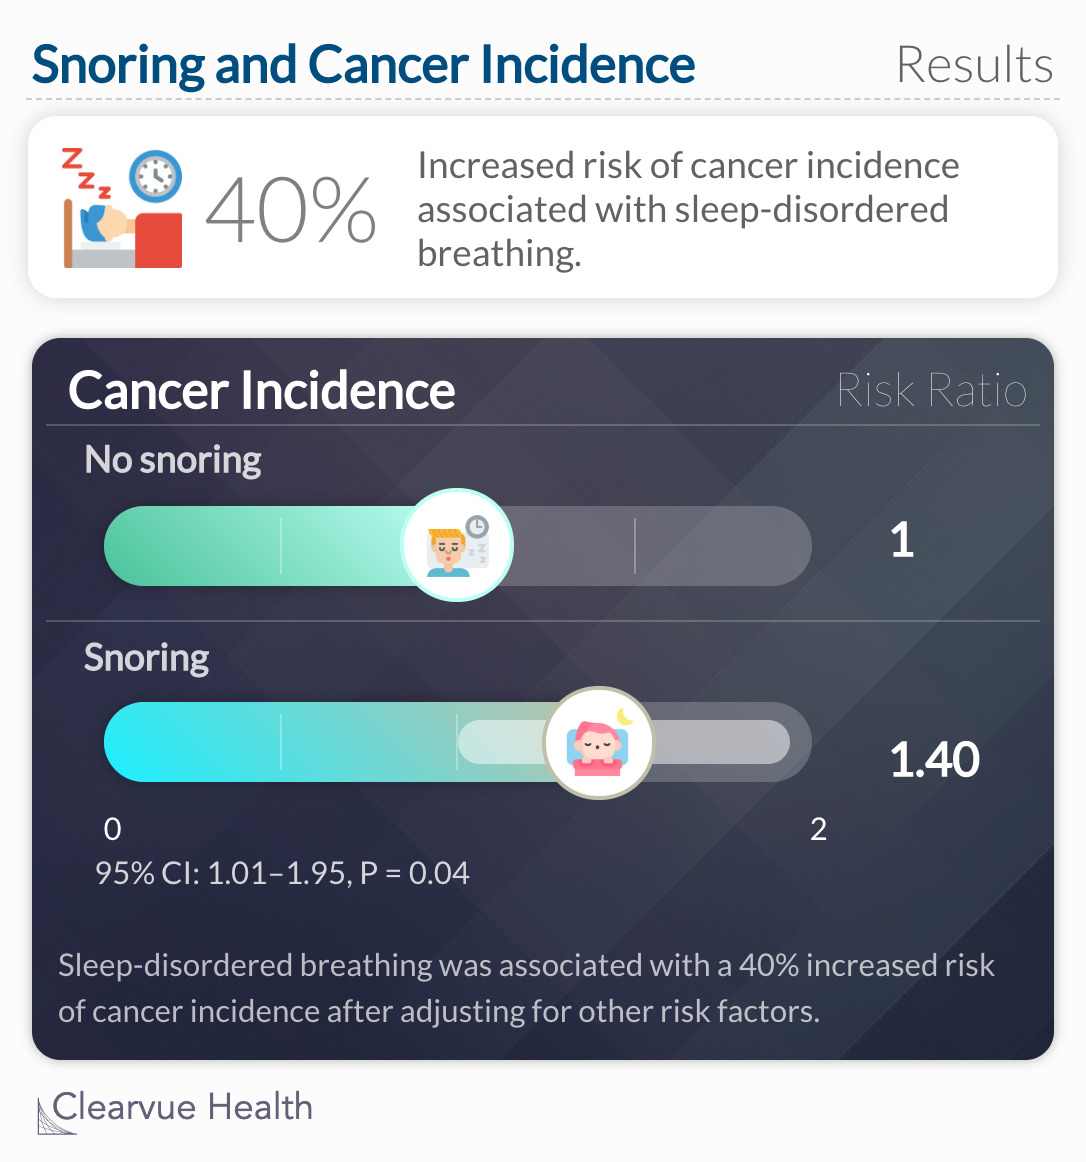 40% increased risk of cancer incidence associated with sleep-disordered breathing.